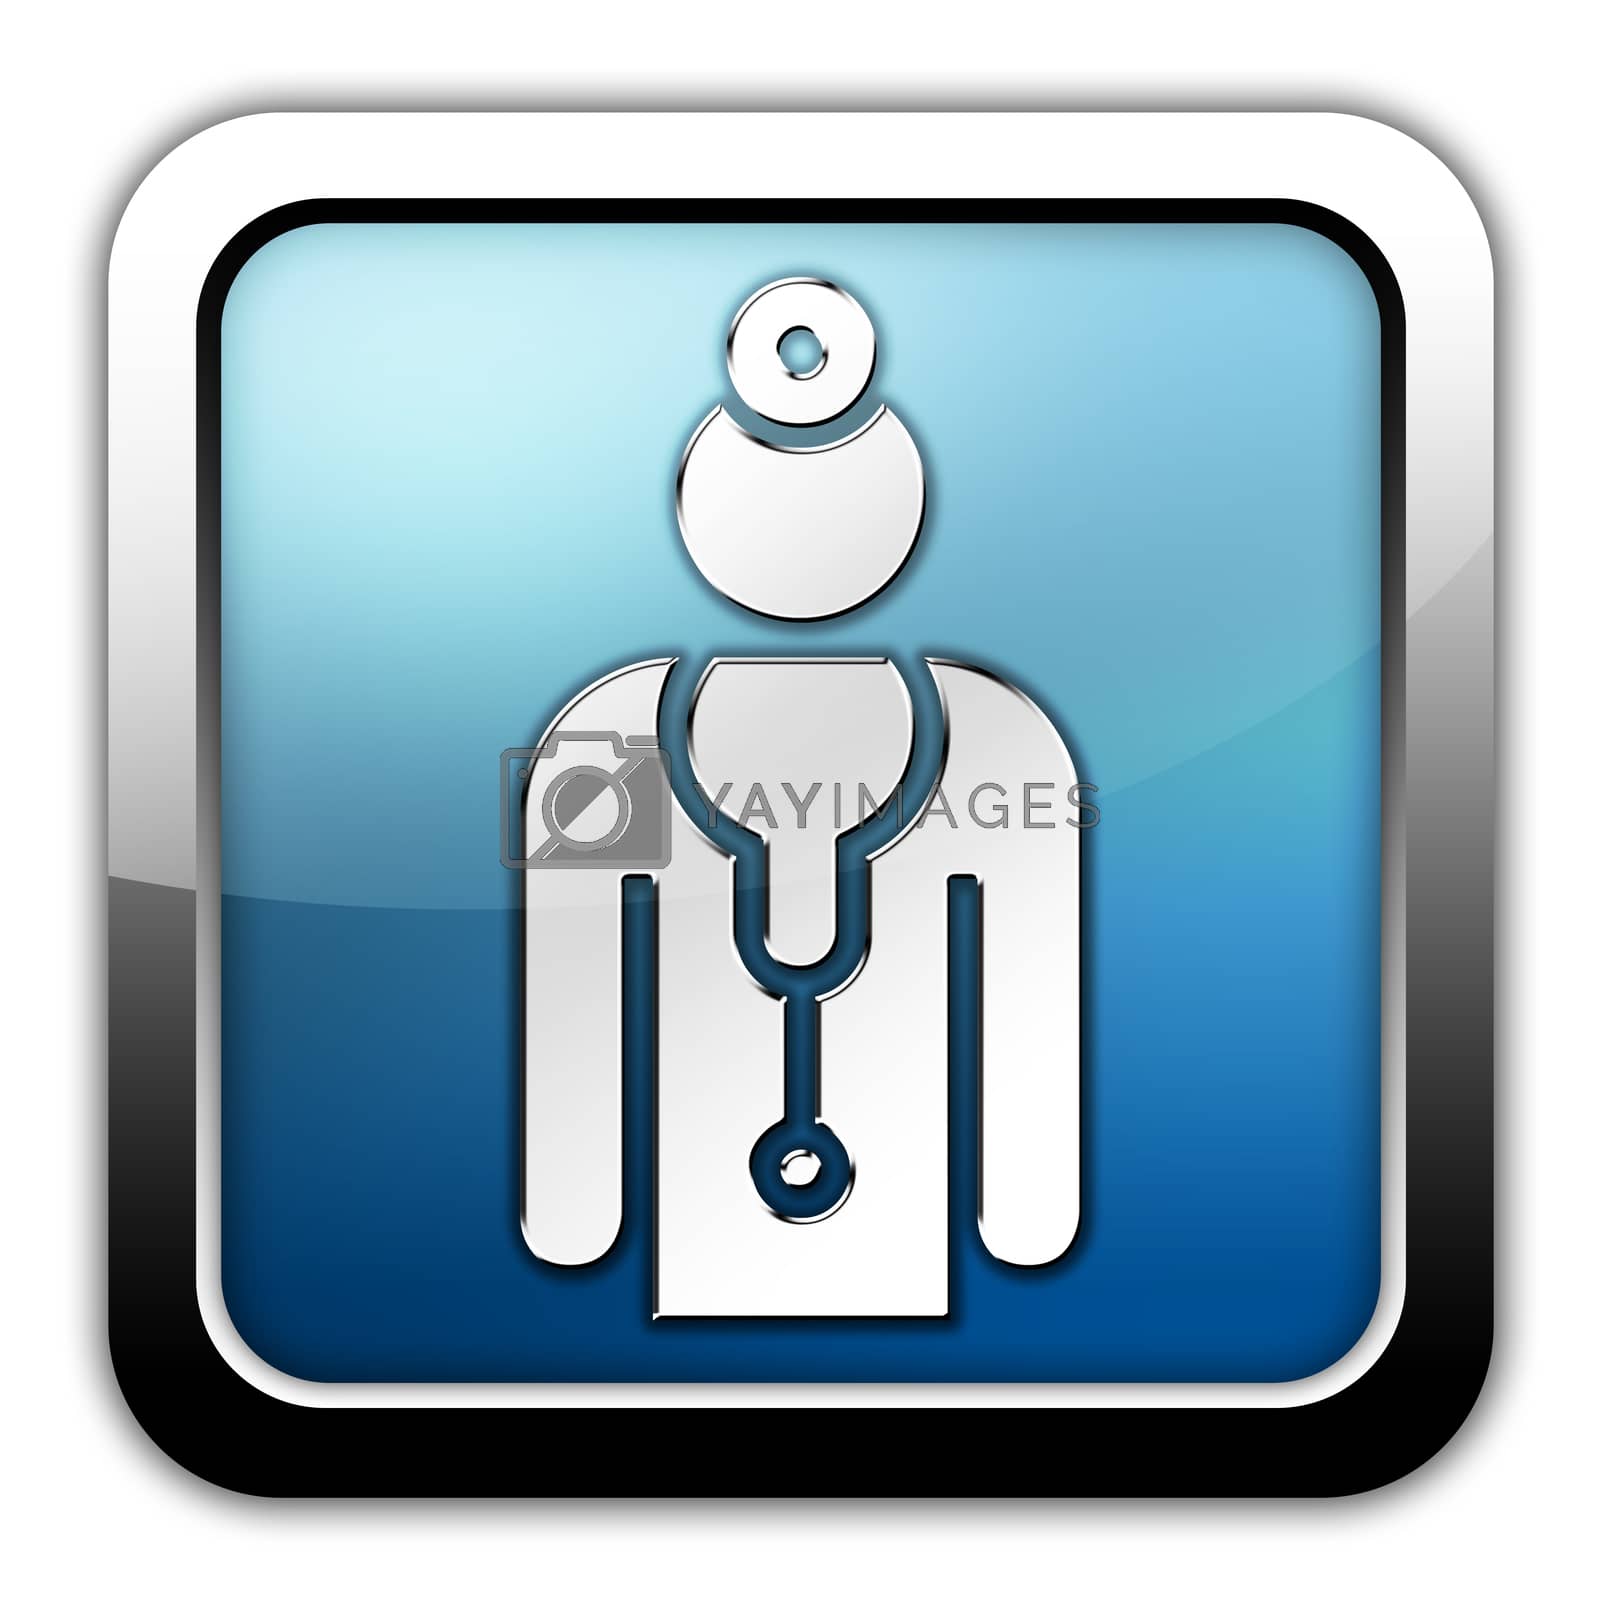 Royalty free image of Icon, Button, Pictogram Physician by mindscanner